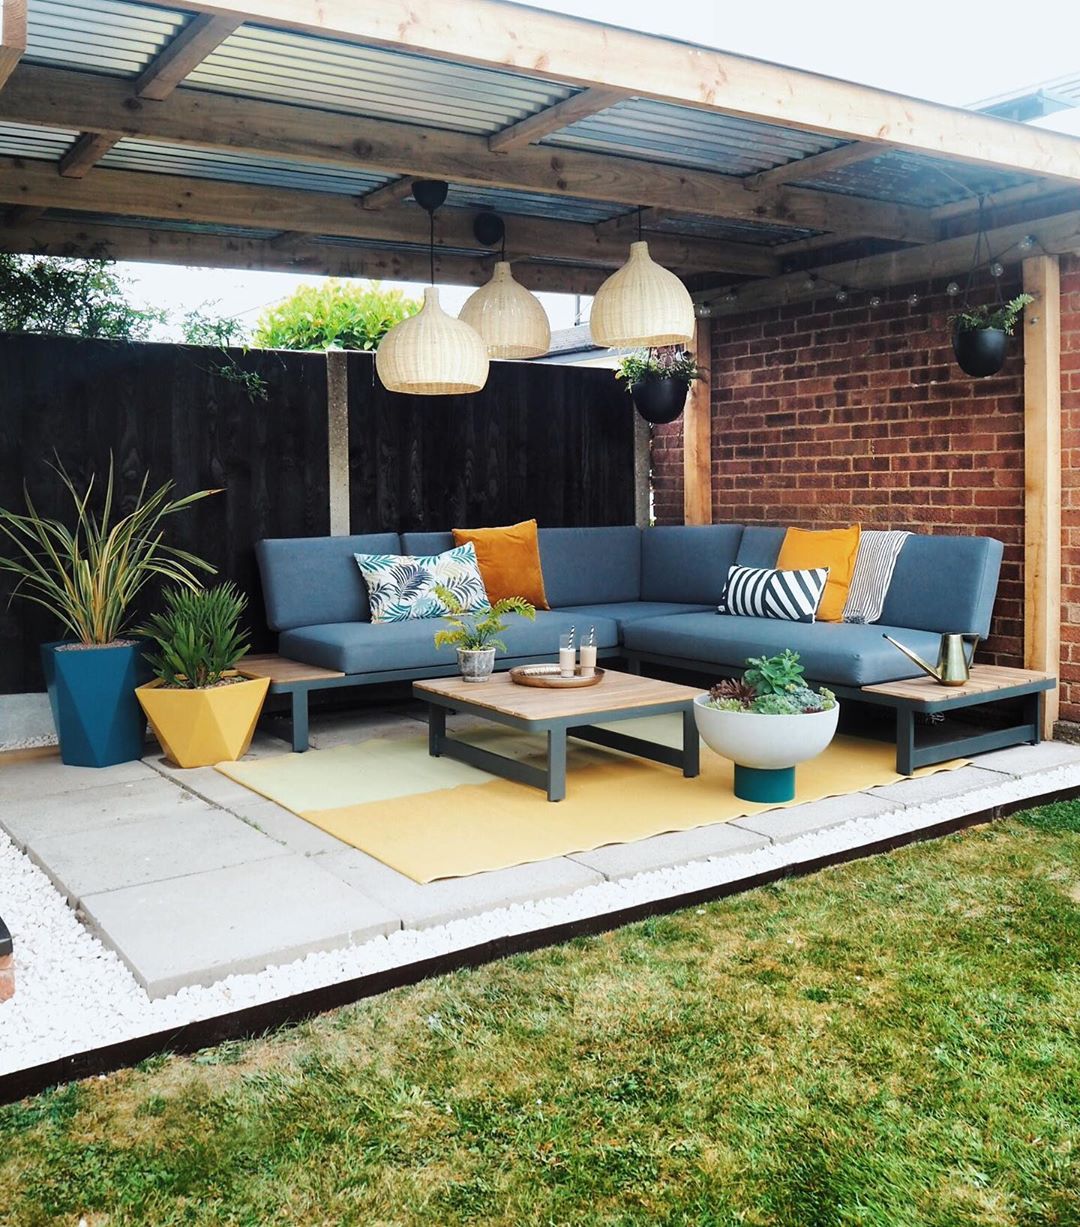 outdoor patio space with a long sectional bench seating set up with table photo by Instagram user @apogee_interiors